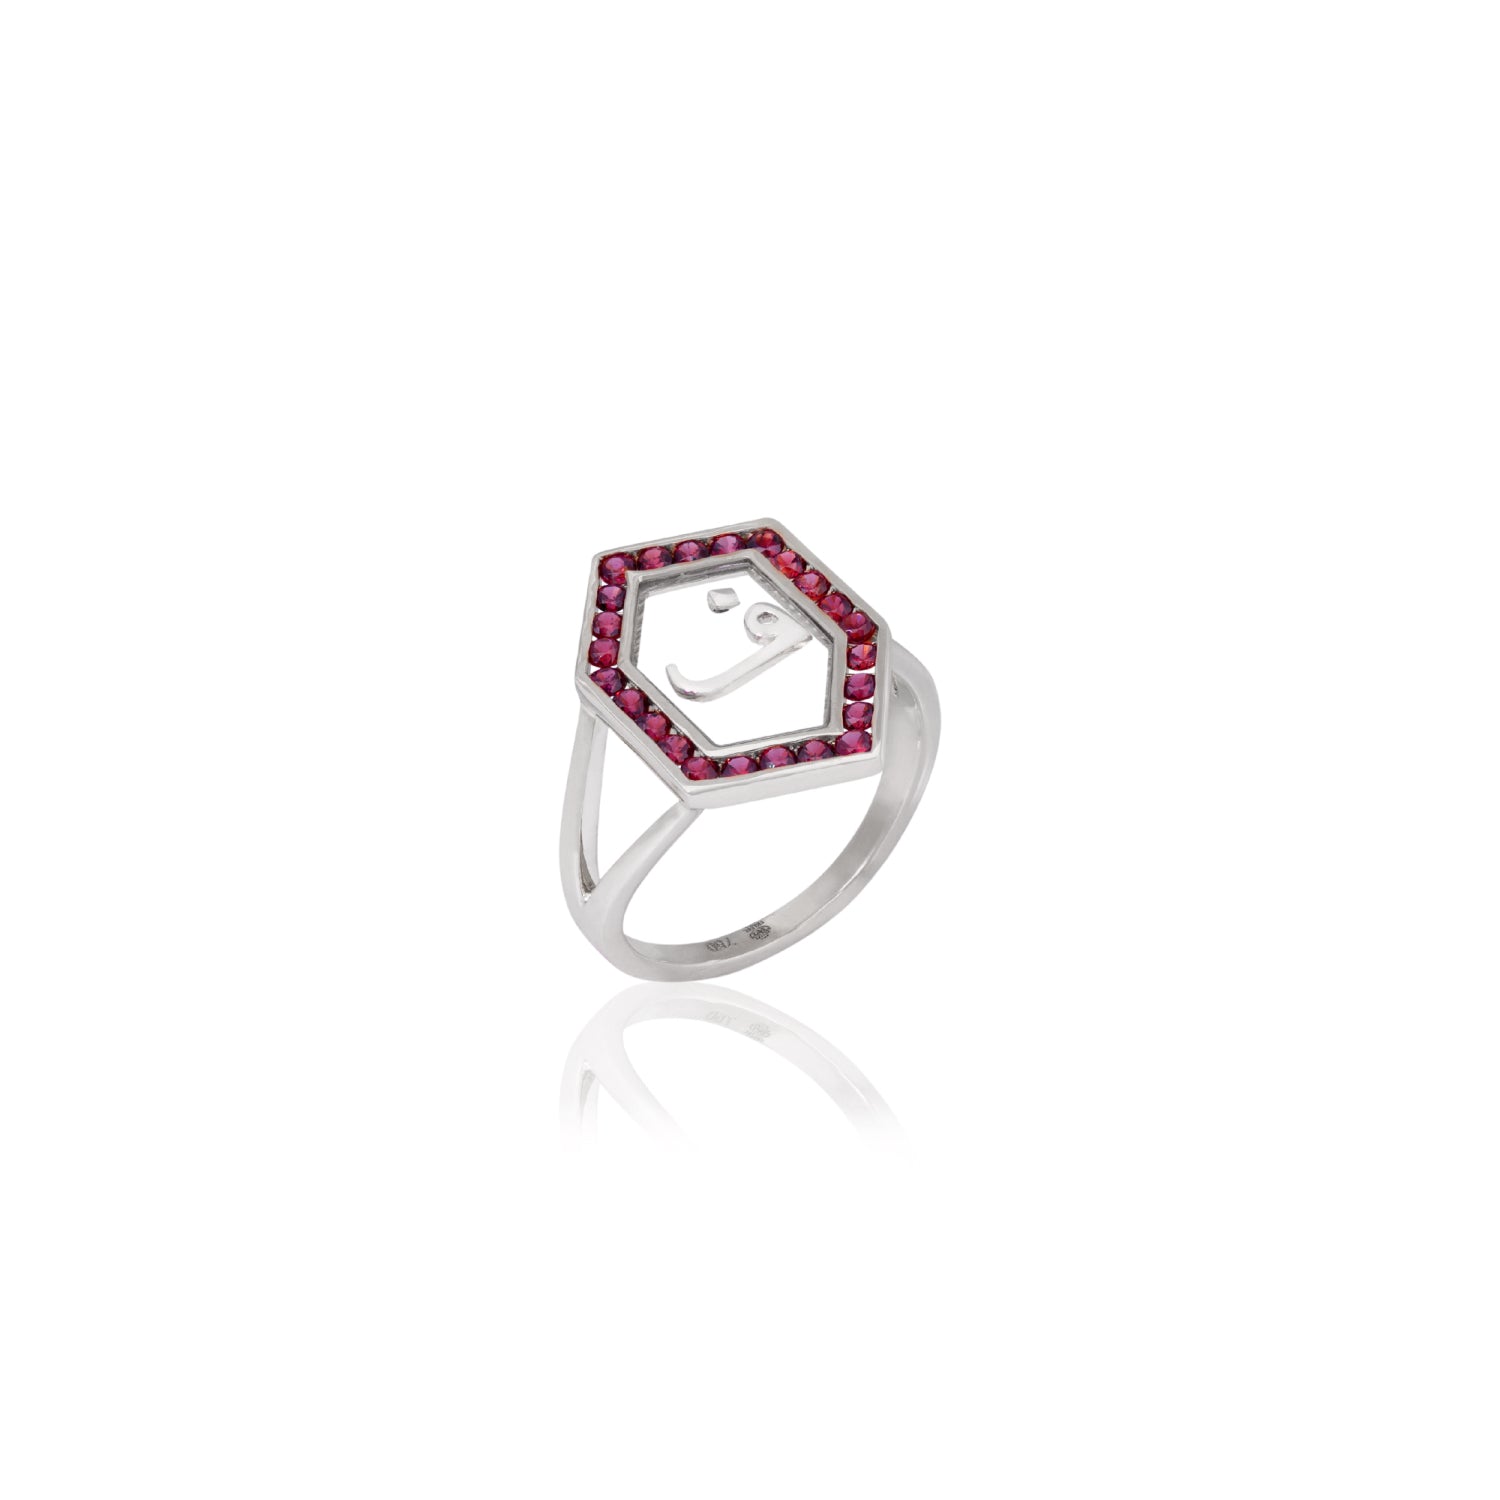 Qamoos 1.0 Letter ف Ruby Ring in White Gold